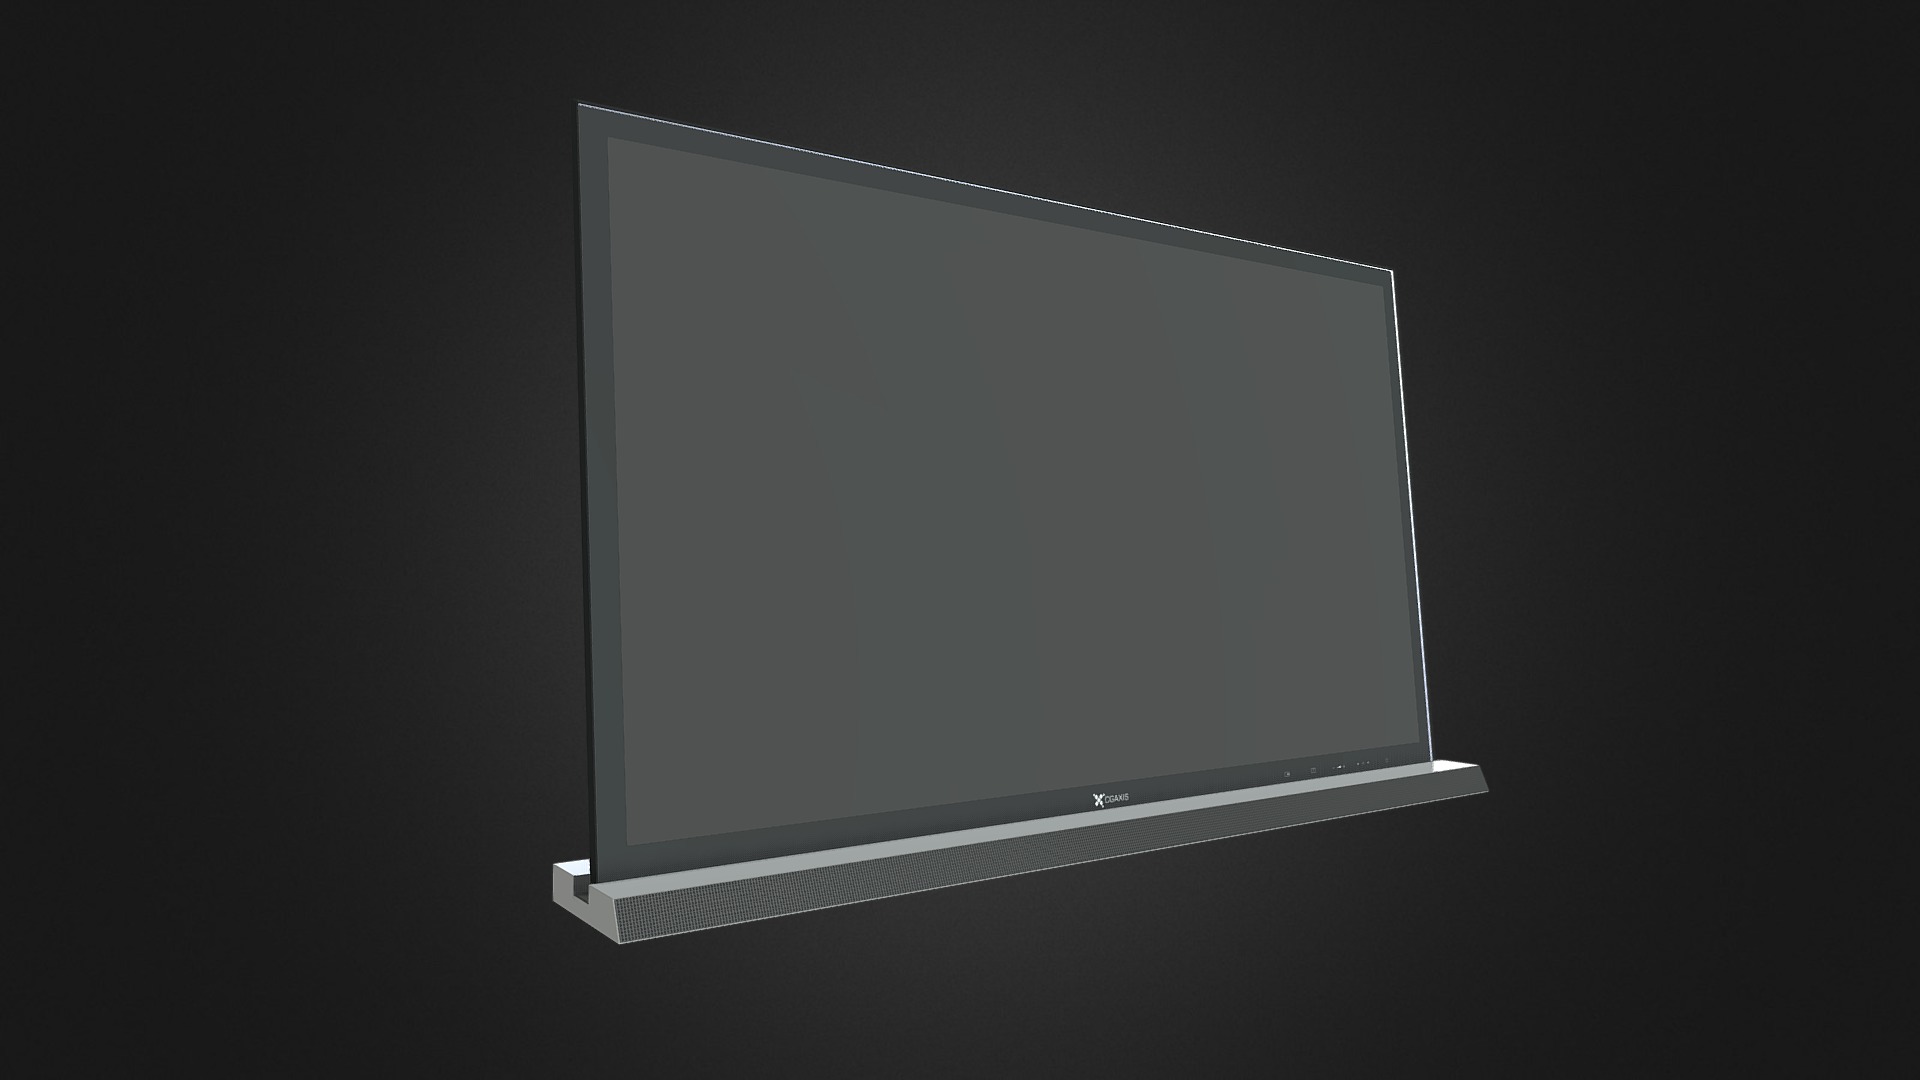 3D model CGAxis TV - This is a 3D model of the CGAxis TV. The 3D model is about a laptop computer on a black background.